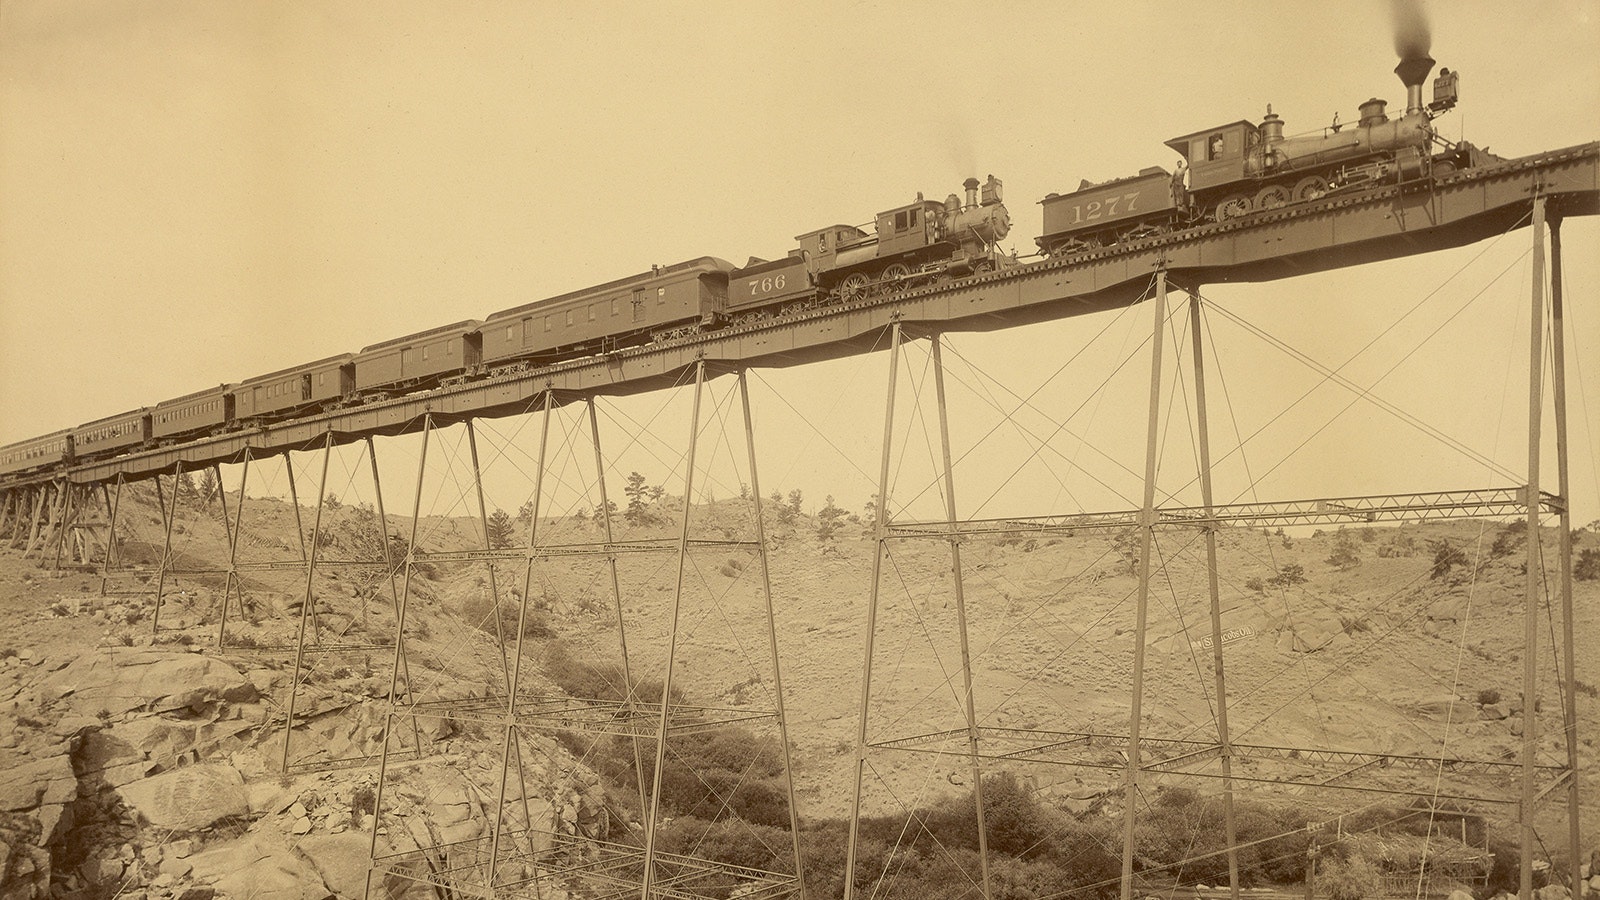 A train crosses the Dale Creek Bridge, the longest and highest bridge the Union Pacific Railroad constructed as part of the transcontinental railroad.